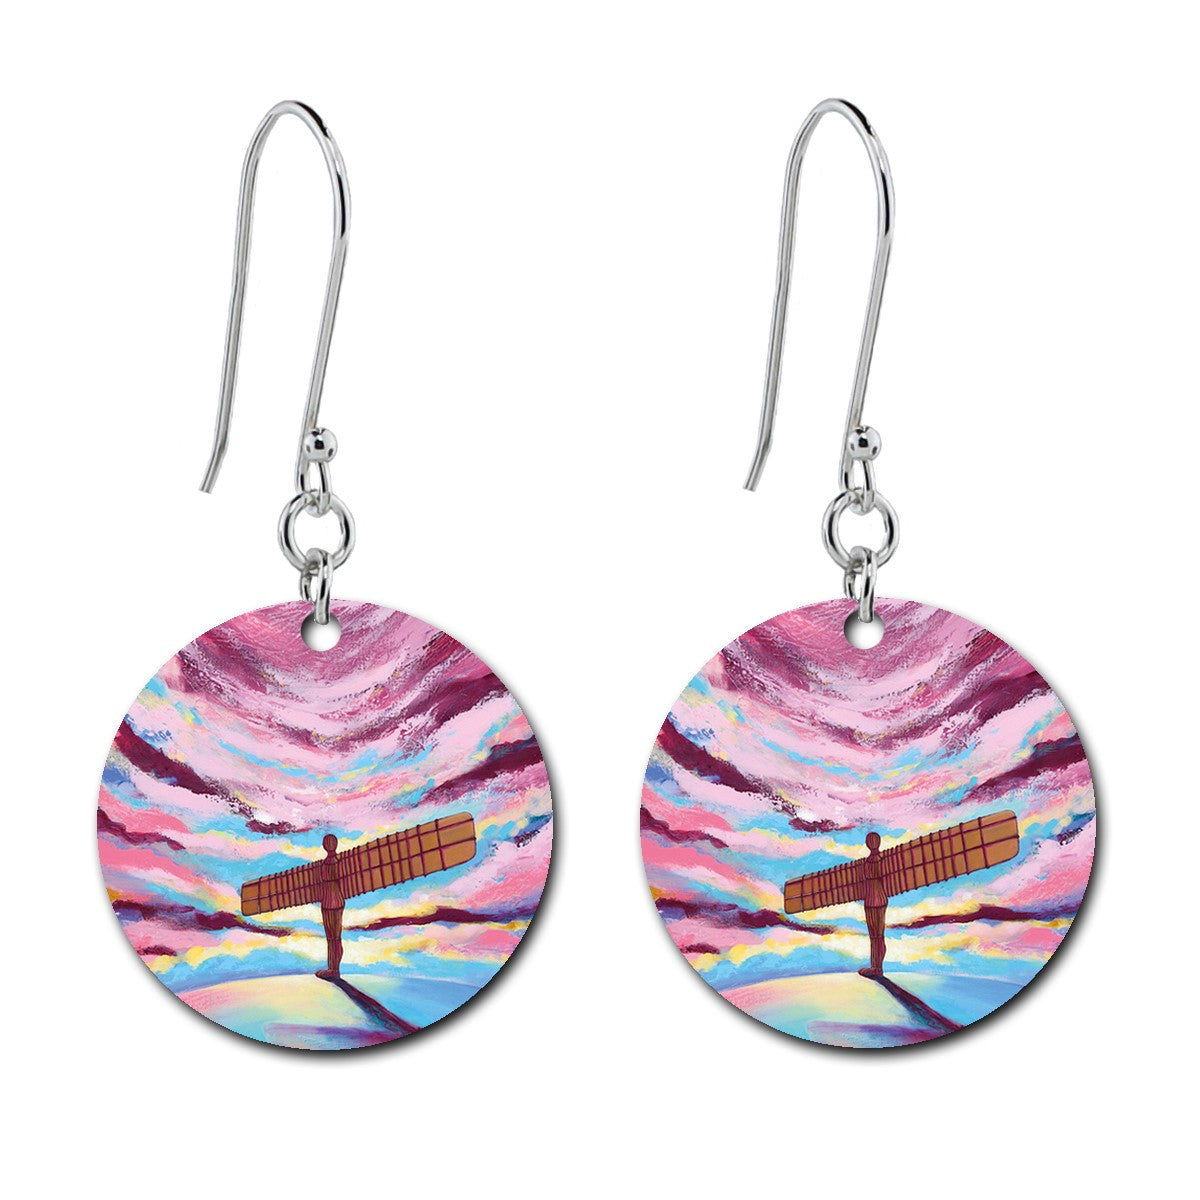 Angel of the North - Earrings